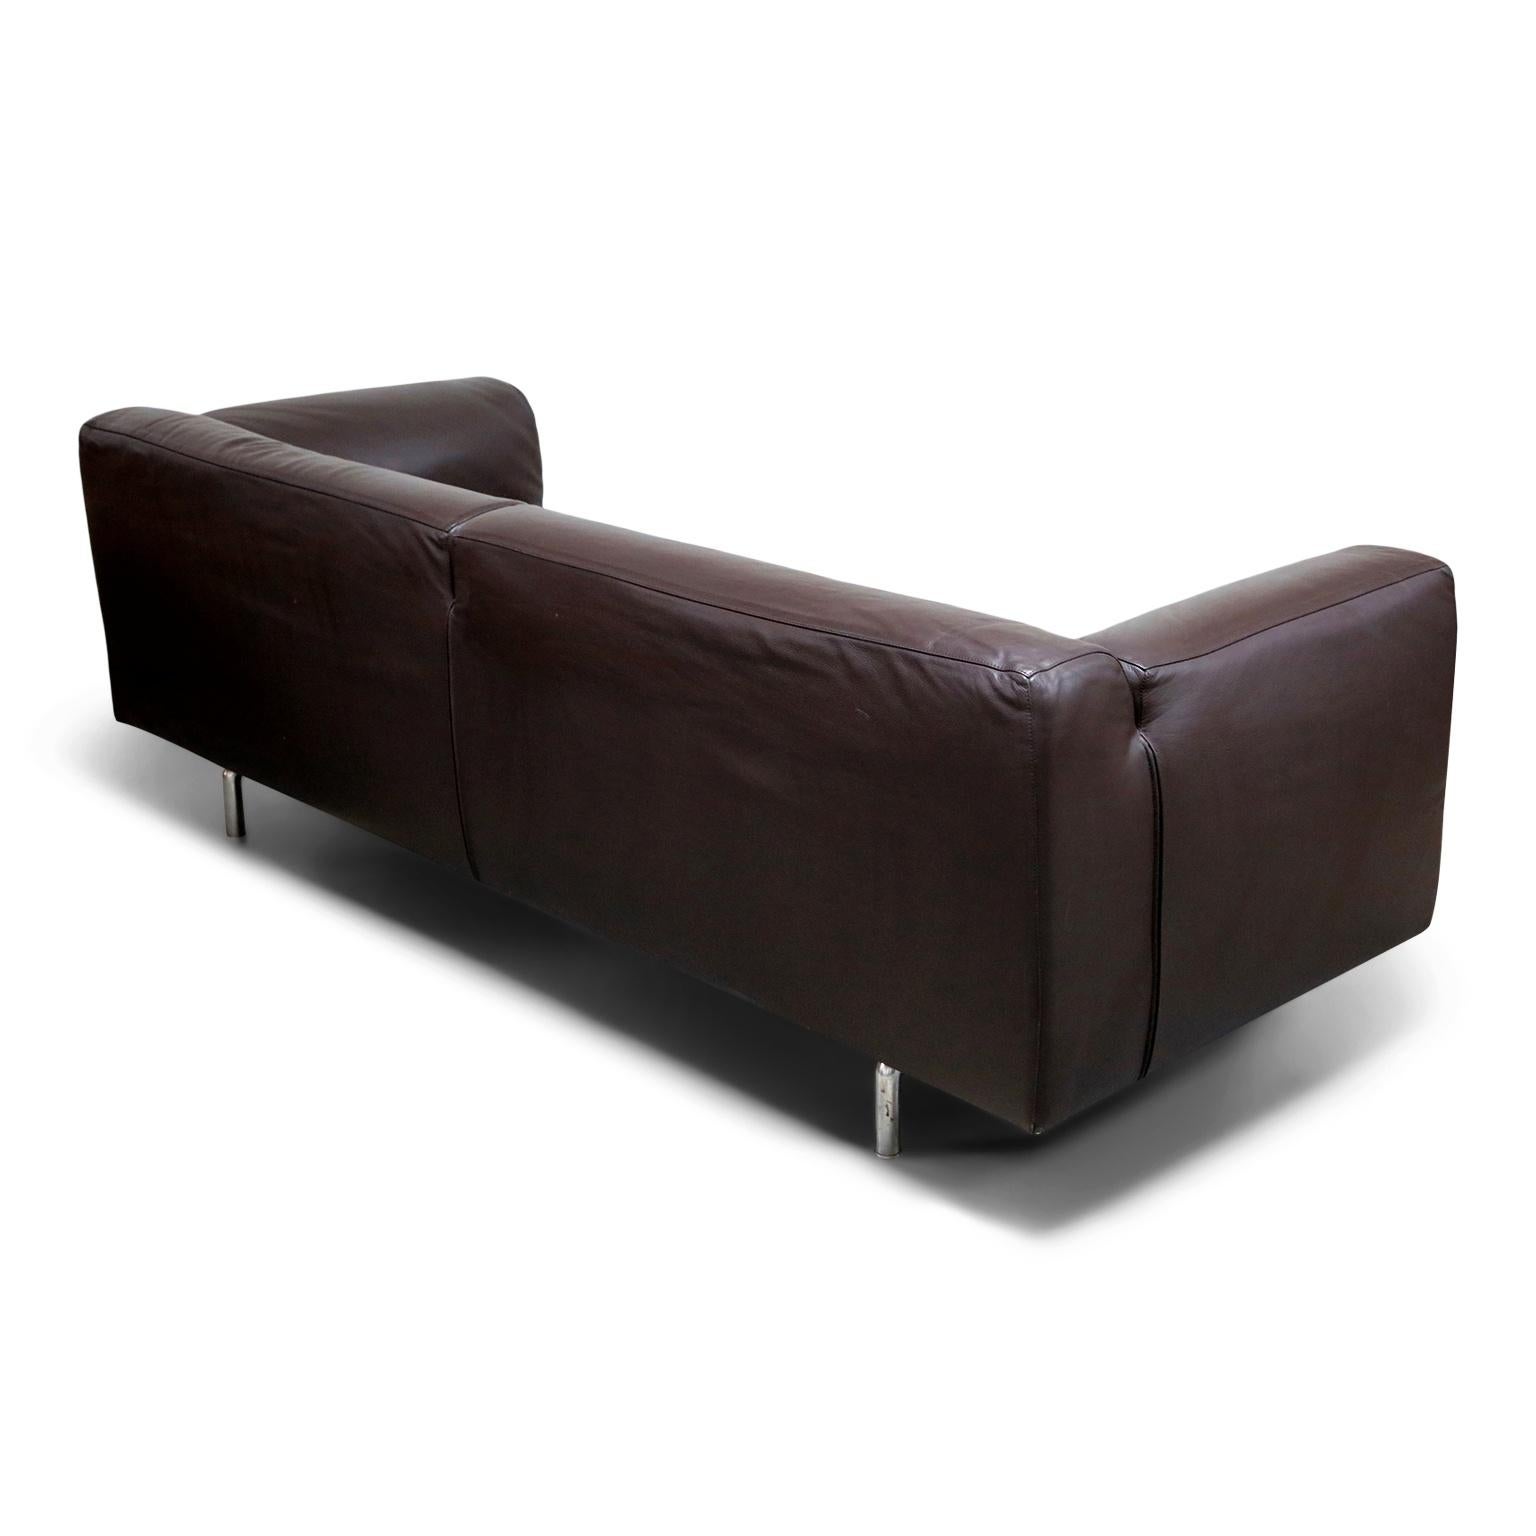 Late 20th Century '250 Met Two-Sofa' in Dark Brown Leather by Piero Lissoni for Cassina, Signed